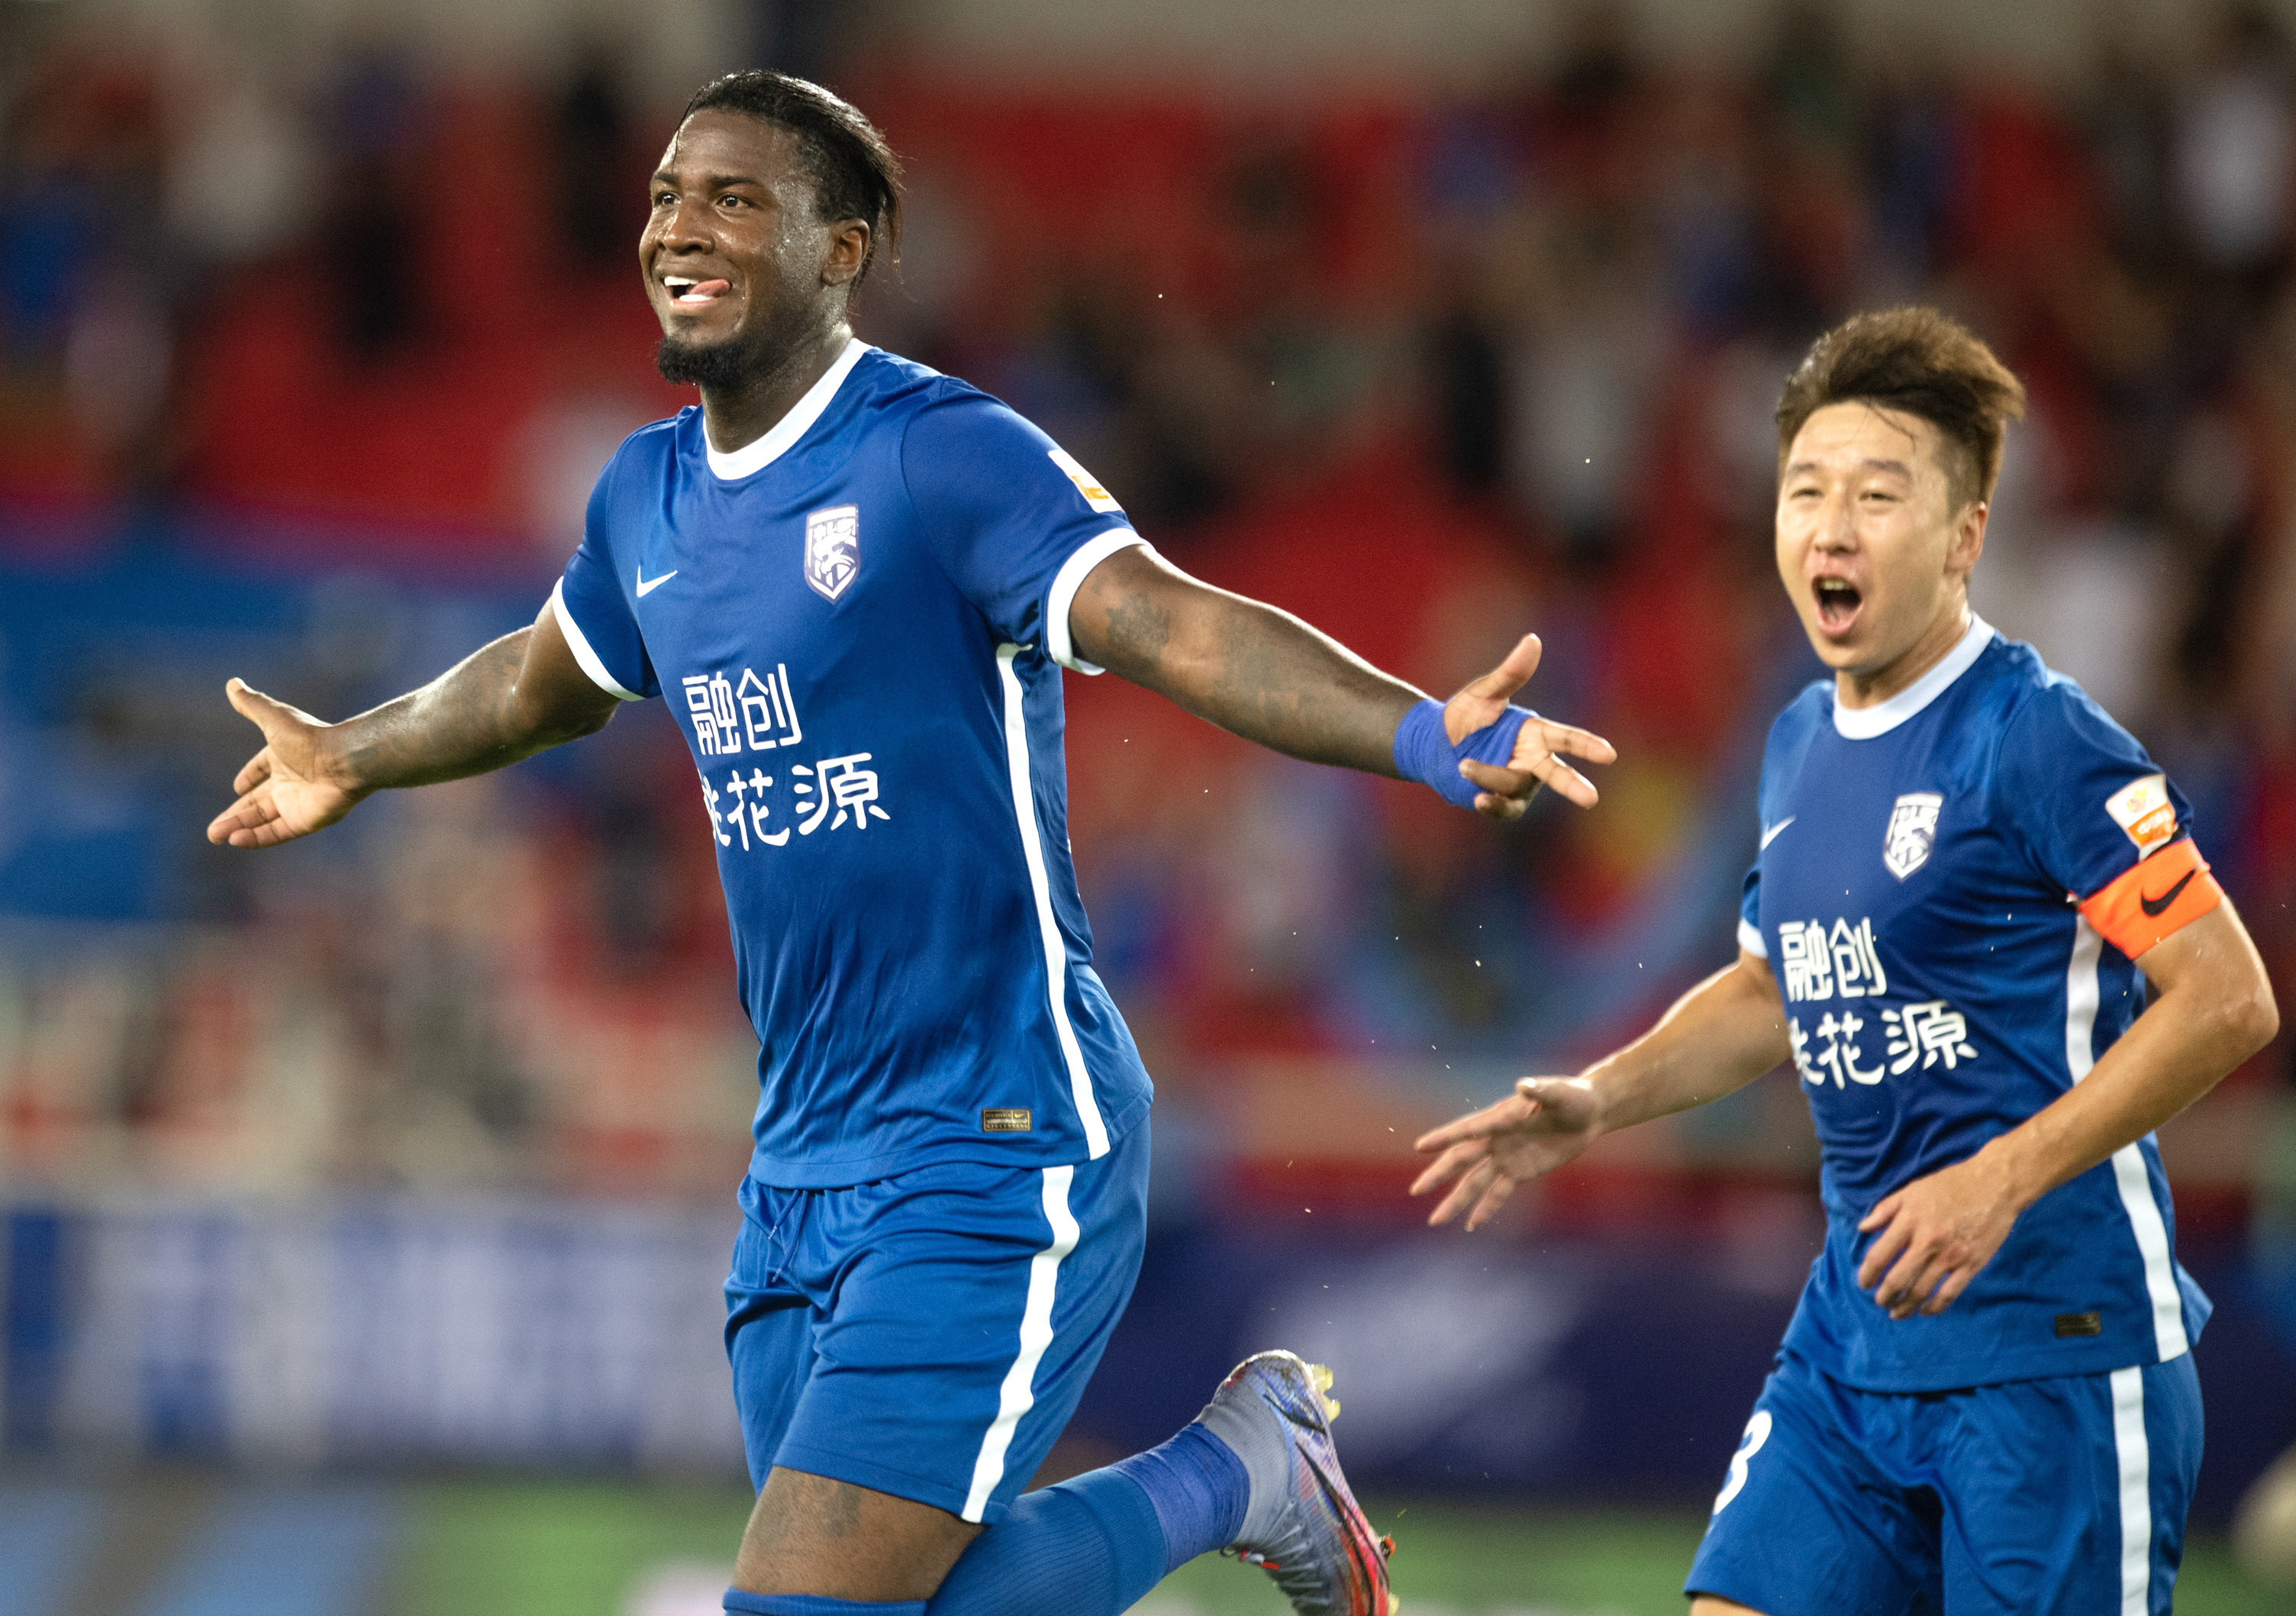 Marcos Vinicius Amaral Alves (left) of Wuhan Three Towns celebrates scoring against Beijing Guoan in the Chinese Super League. Photos: Xinhua